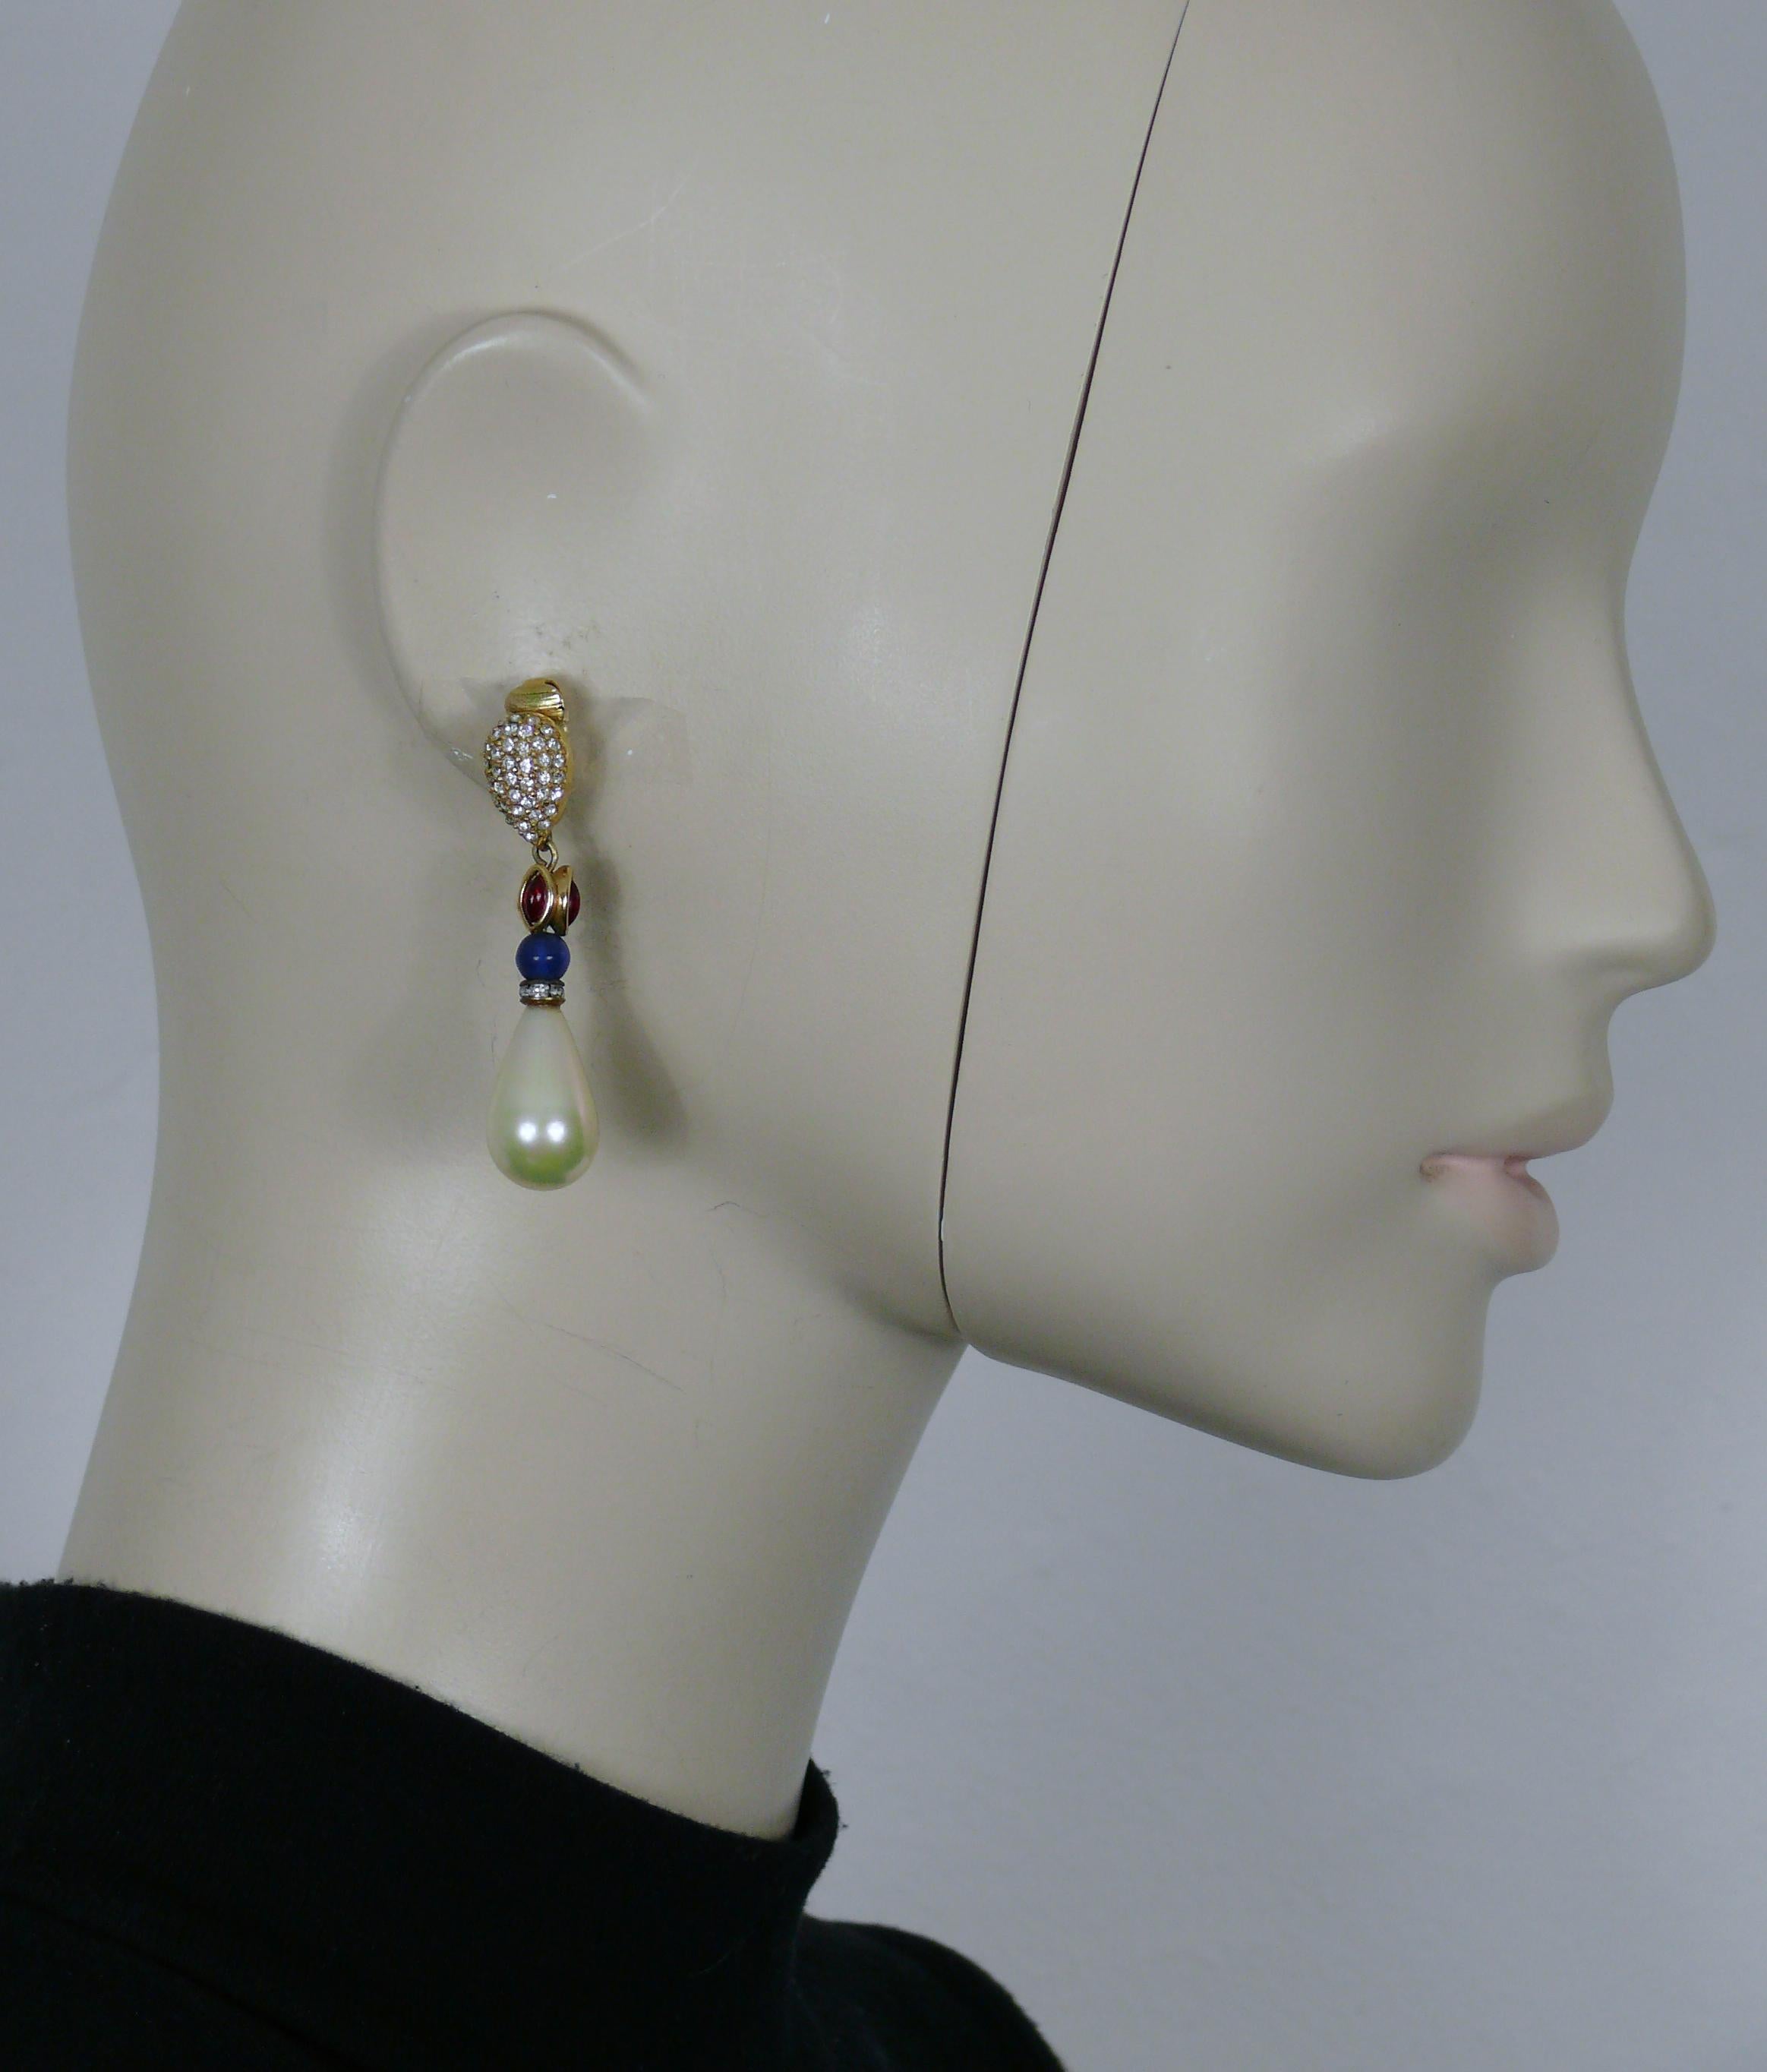 CHRISTIAN DIOR vintage gold tone dangling earrings (clip-on) embellished with clear crystals, red glass cabochons, blue bead and a faux pearl teardrop.

Marked CHR. DIOR Germany.

Indicative measurements : height approx. 5.1 cm (2.00 inches) / max